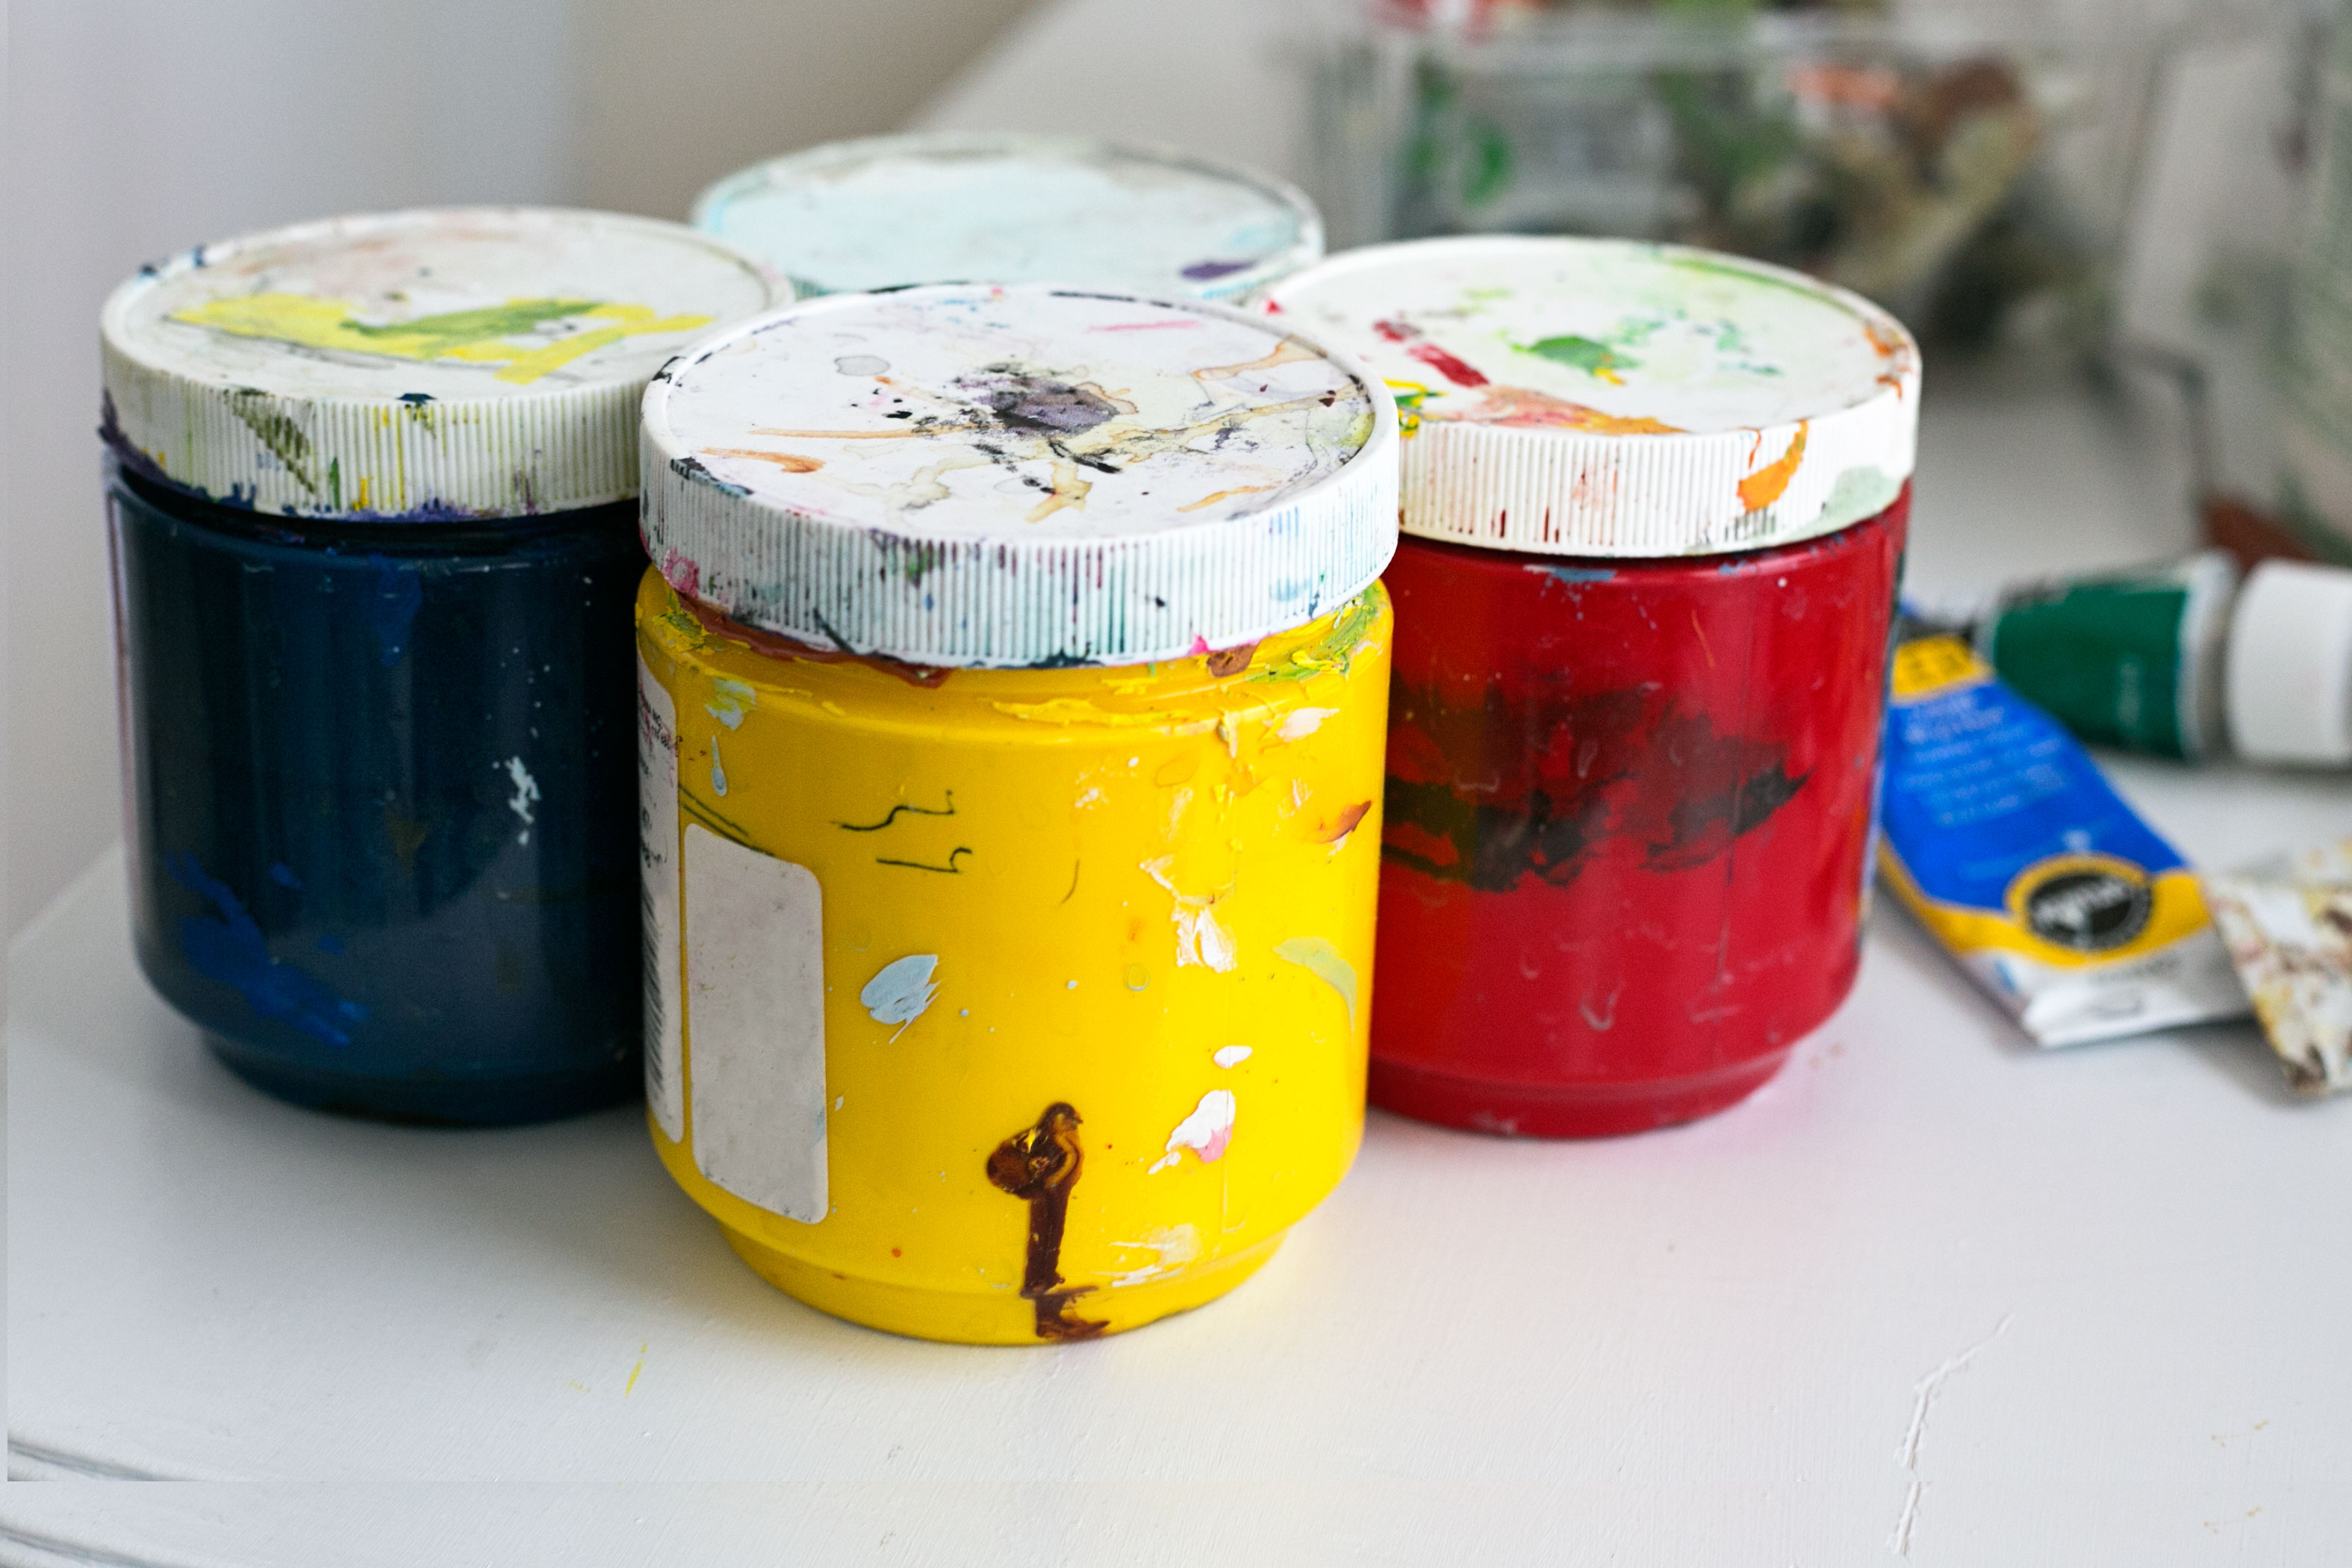 What Type of Paint Can You Use on Clay Pots?